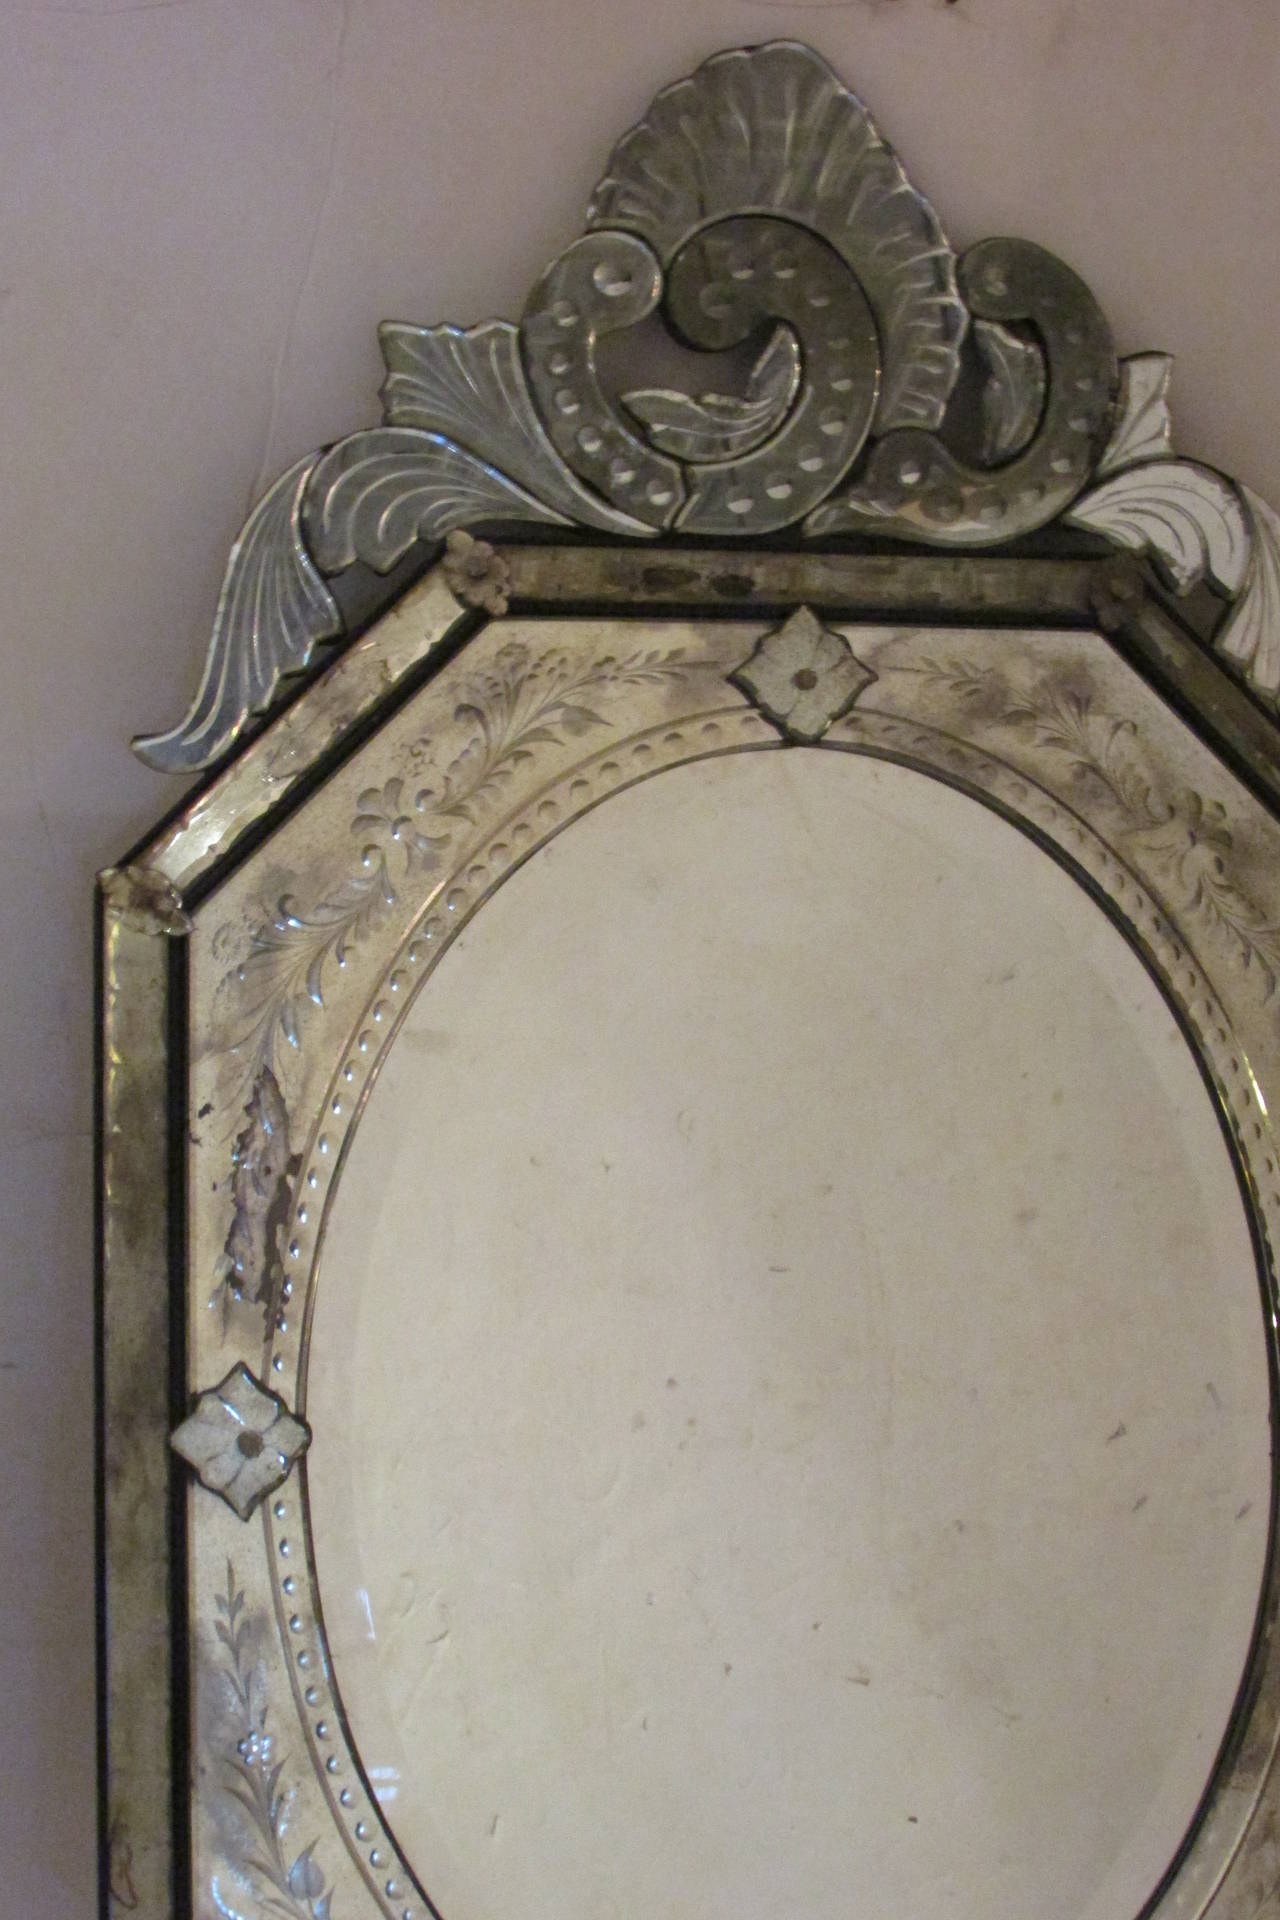 A large octagonal form Venetian mirror with a finely etched mirrored framework and asymmetrical top and bottom acanthus form crests. The interior oval mirror glass with bevelled edges. The entire mirror with beautifully aged desirable oxidation to